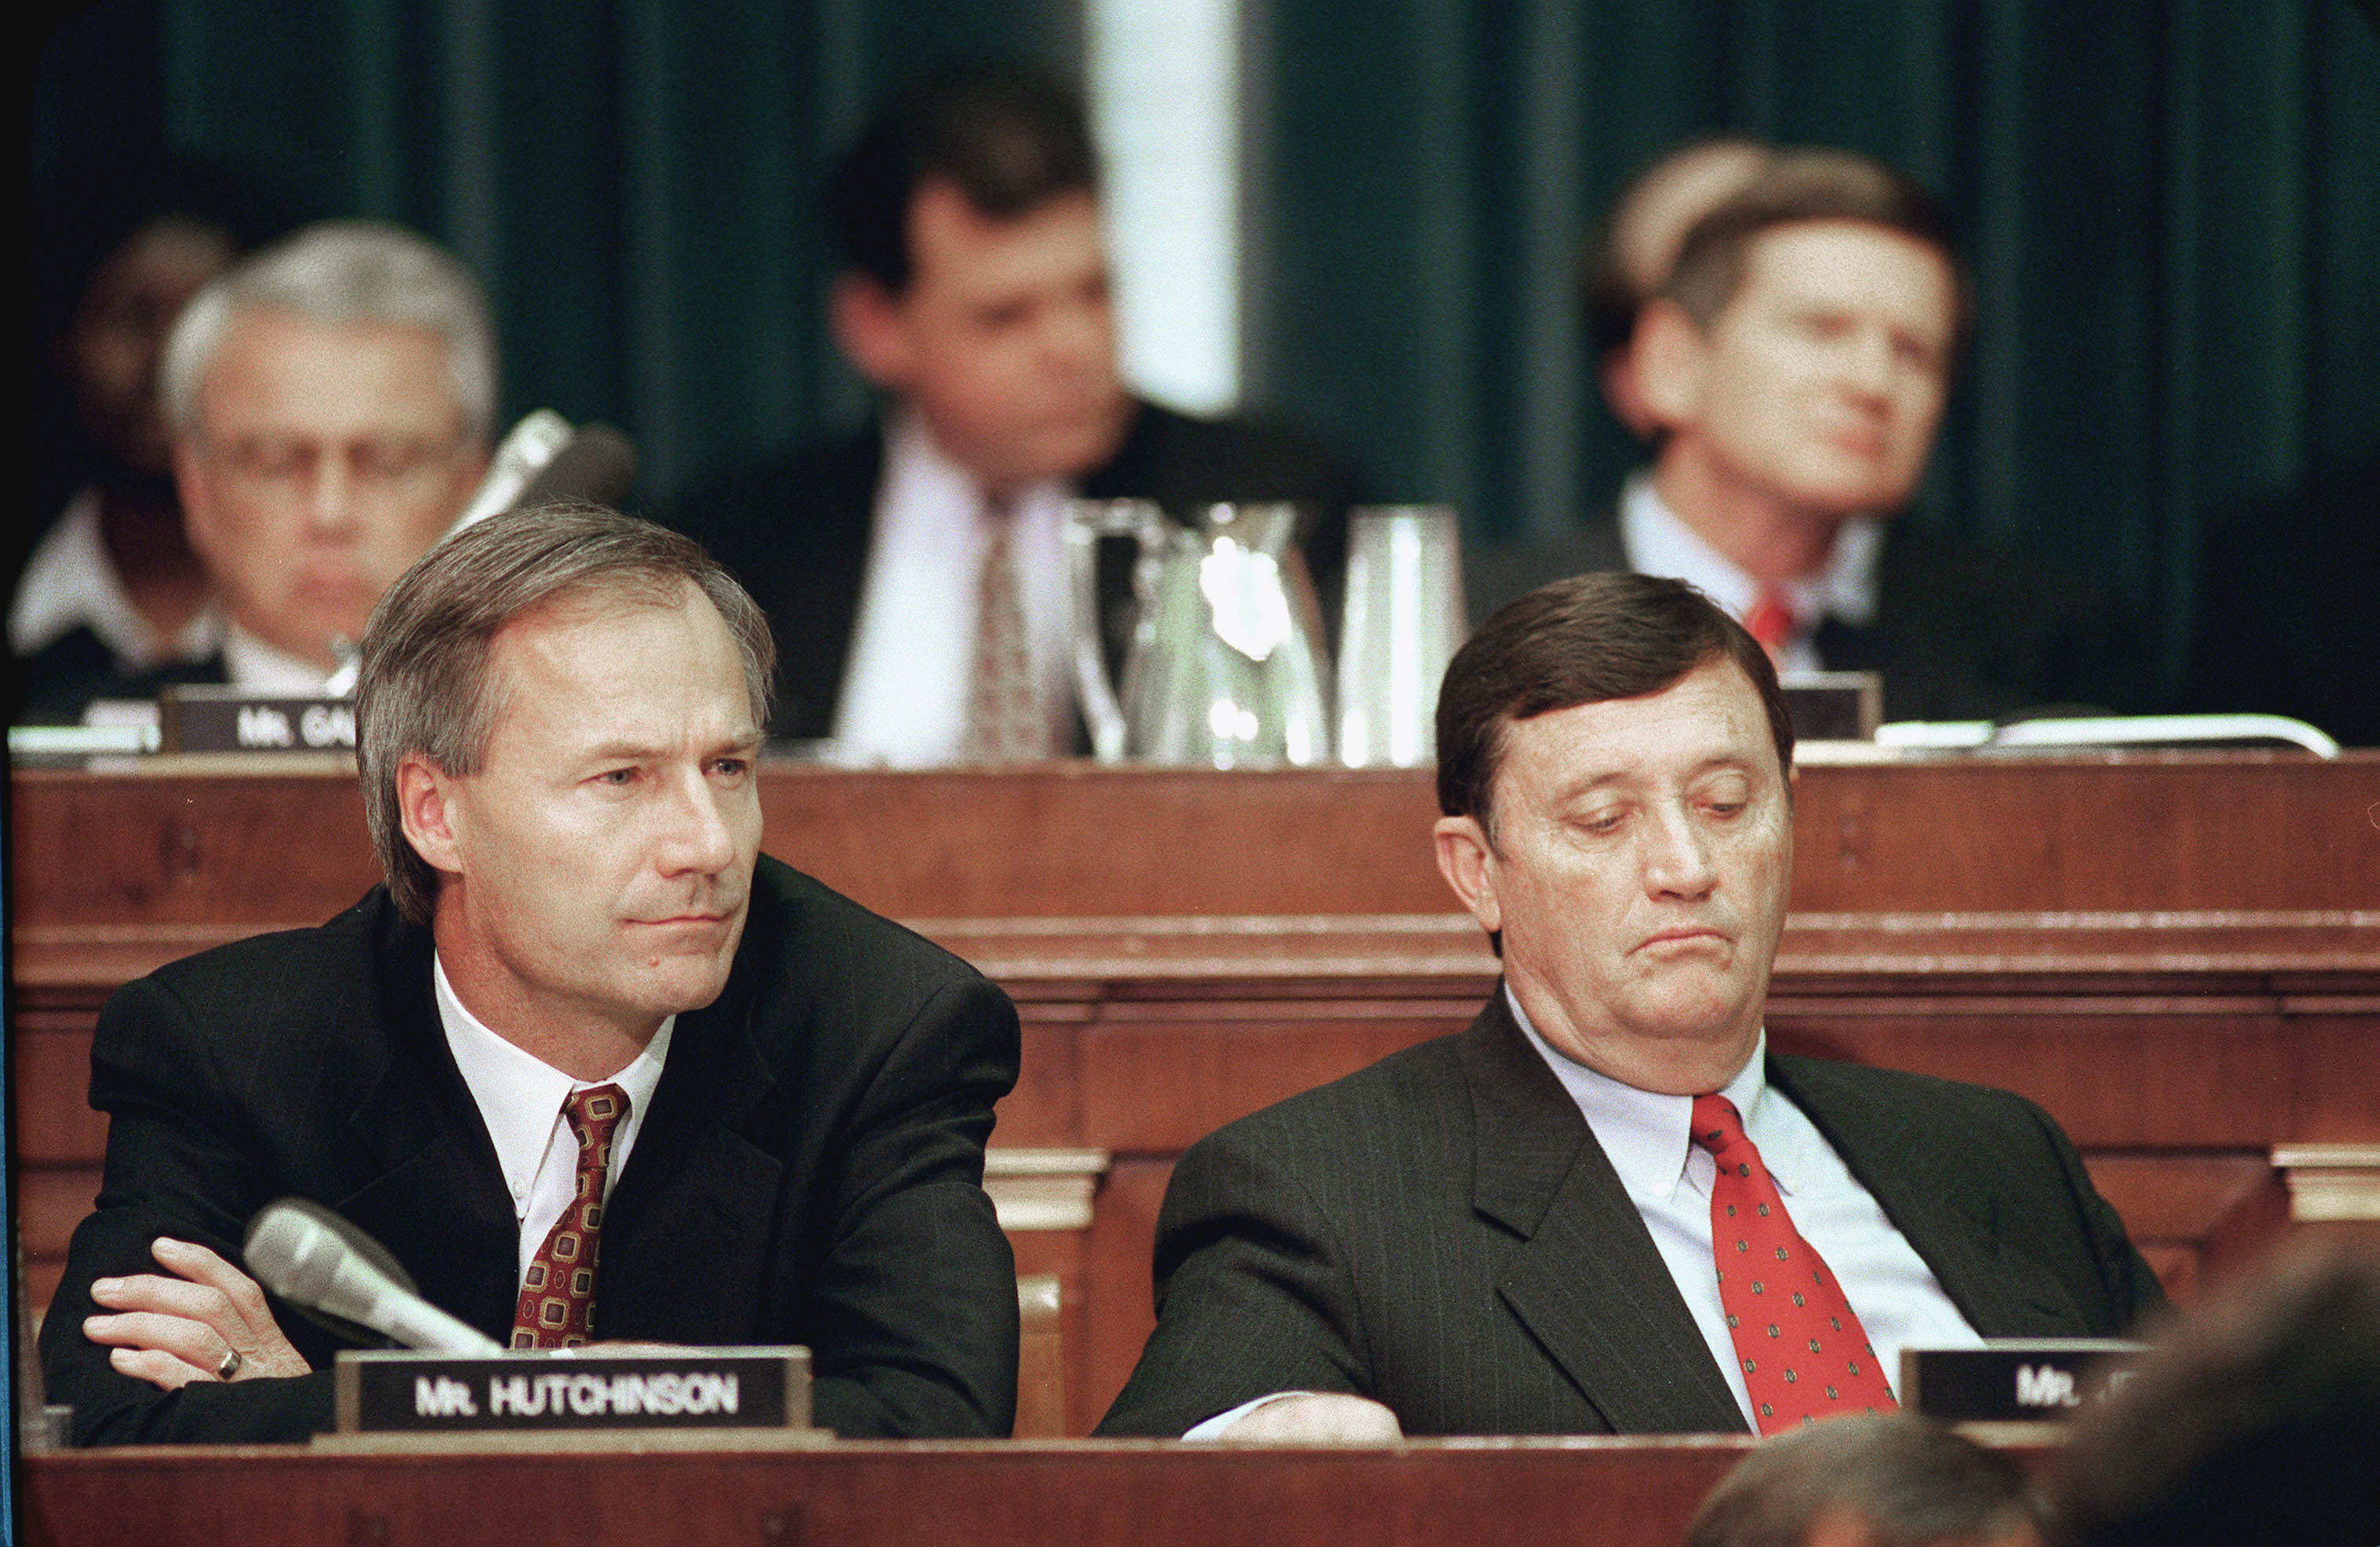 Asa Hutchinson,R-Ark., and Bill Jenkins,R-Tenn.,listen to Independent Counsel Kenneth Starr opening statement before the House Judiciary Committee regarding articles of impeachment against President Bill Clinton.  ( Scott J. Ferrell--Congressional Quarterly/Getty Images) (Scott J. Ferrell&mdash;CQ-Roll Call,Inc.)